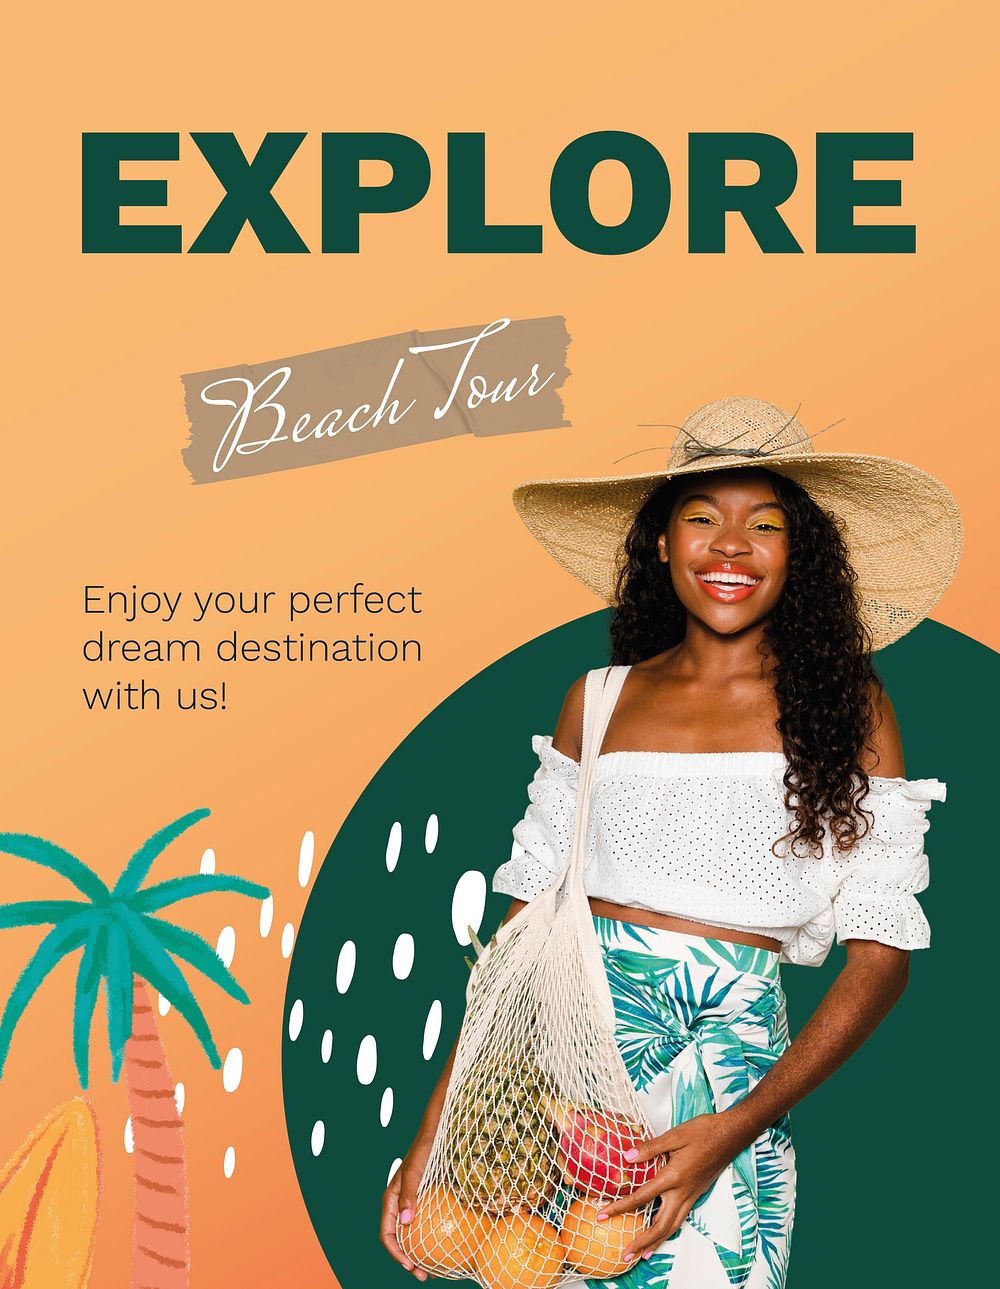 Beach tour flyer template, promotion ad vector